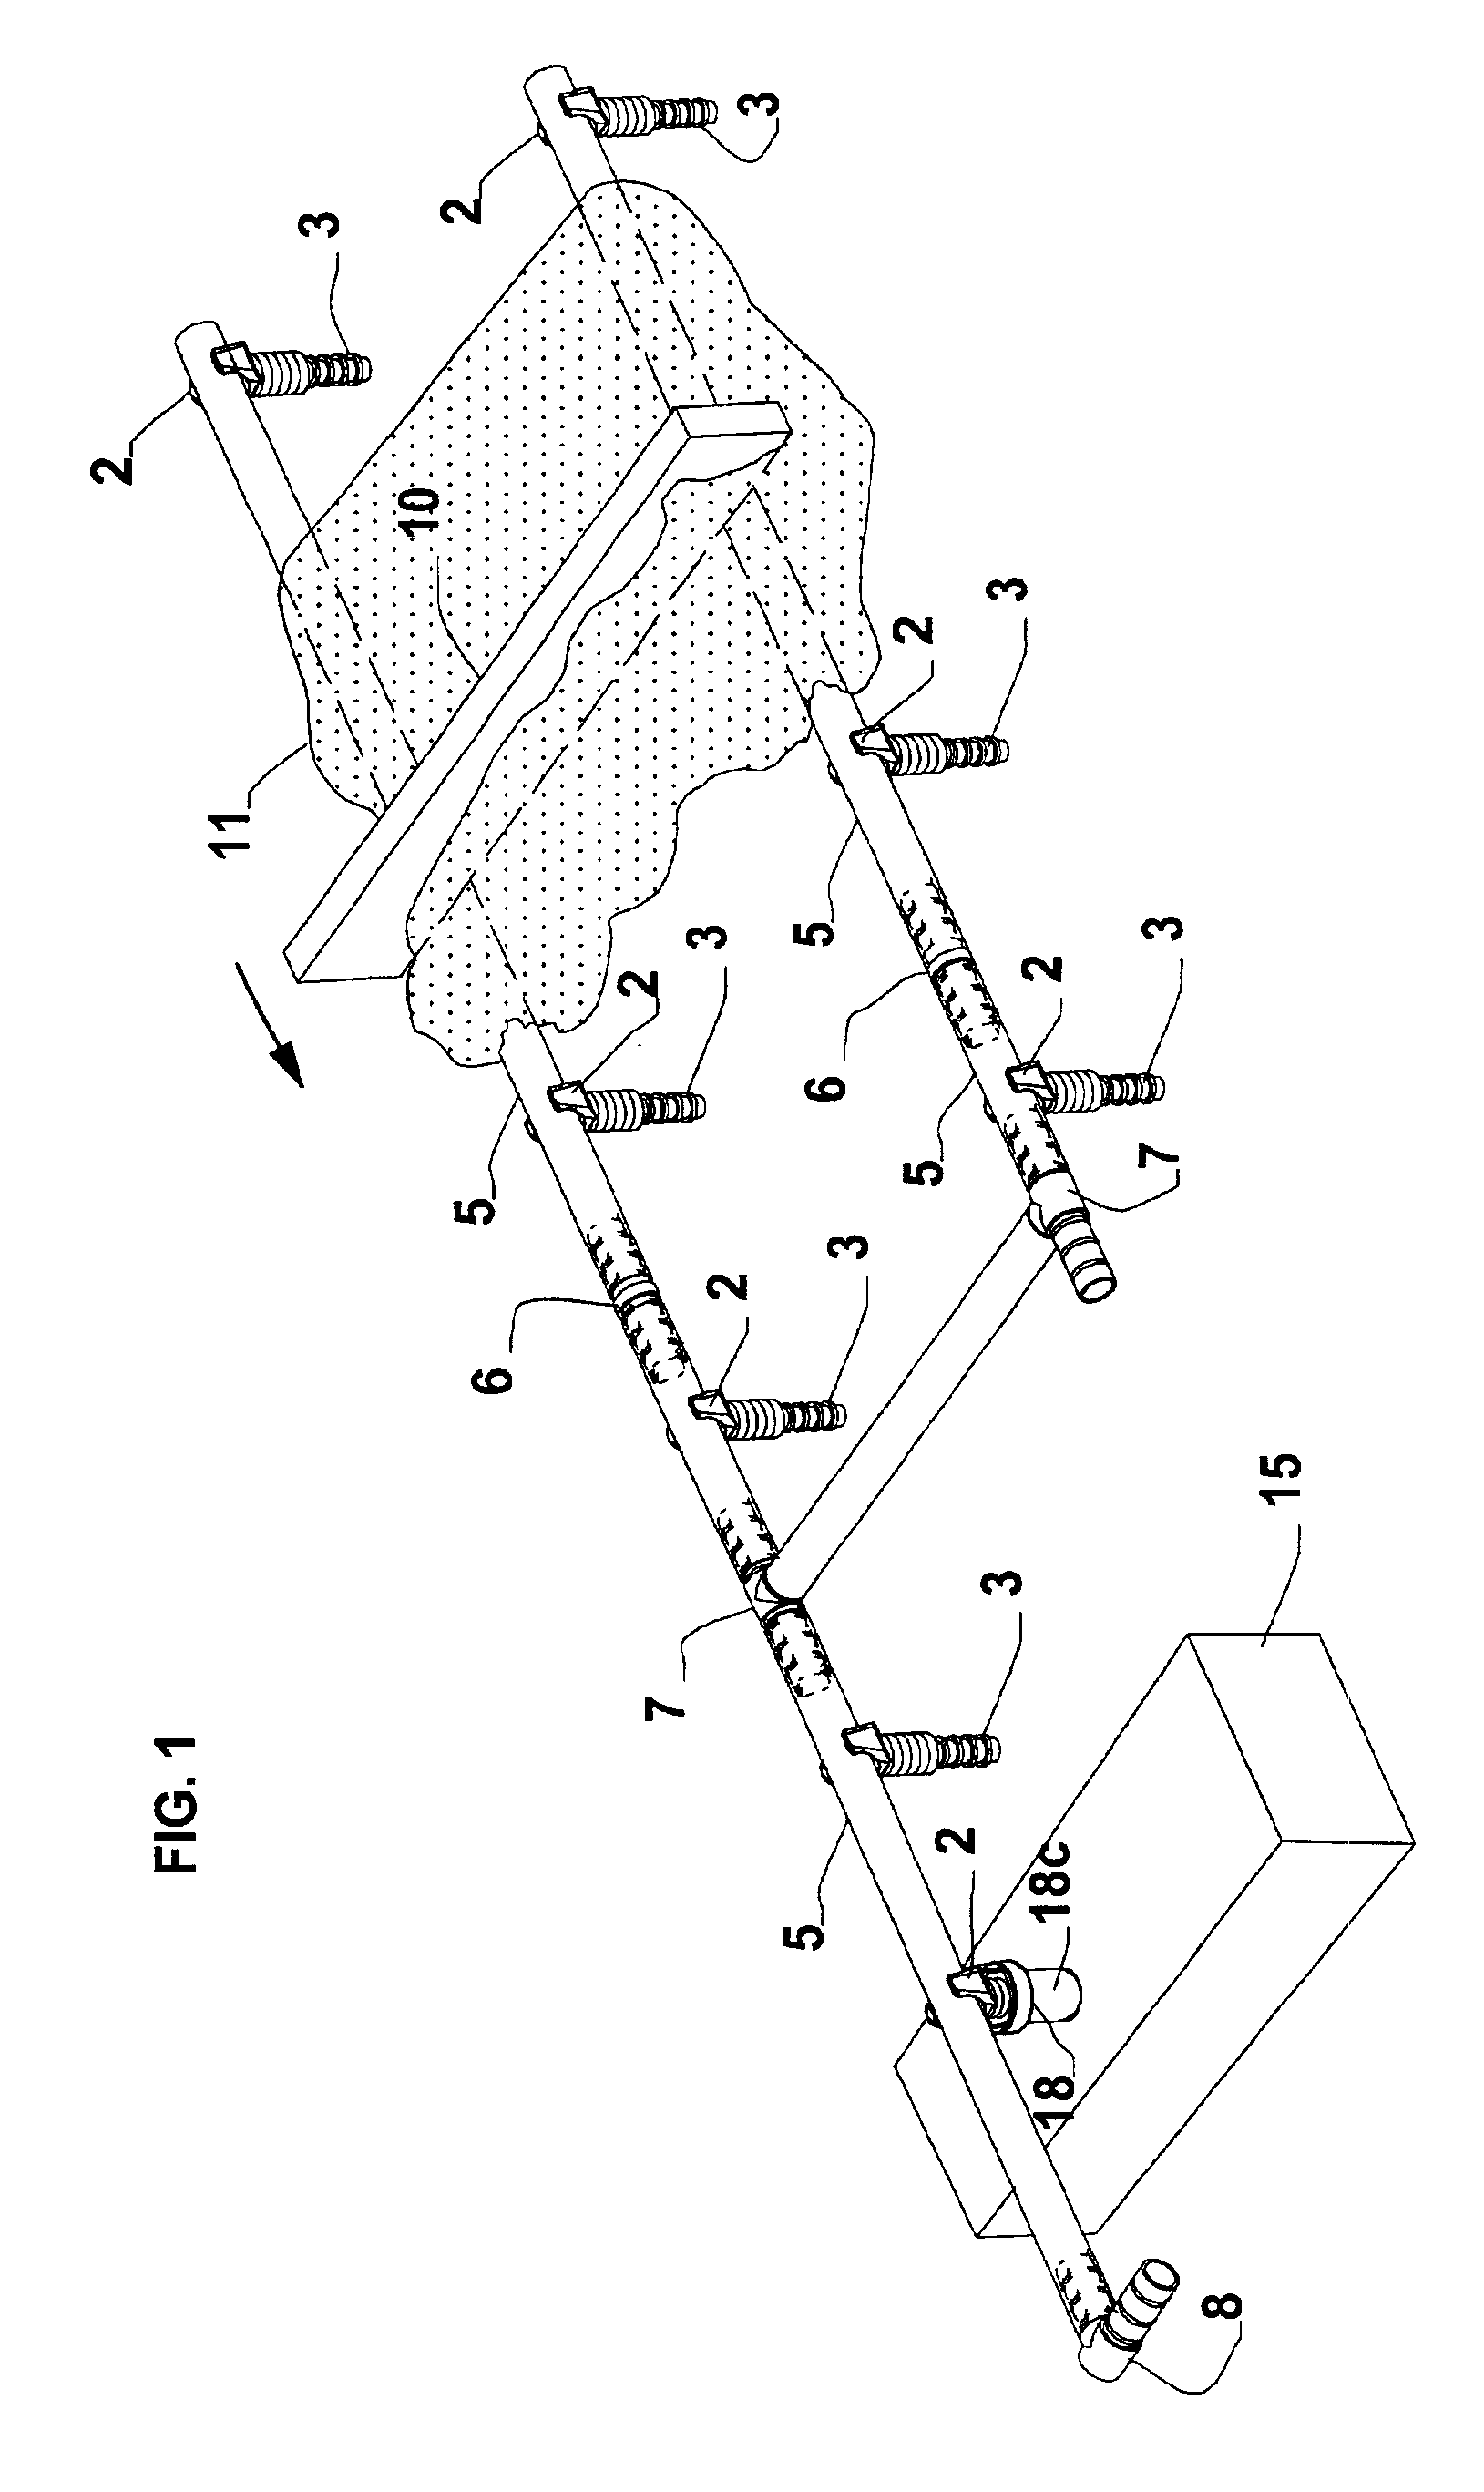 Screed ski and support system and method